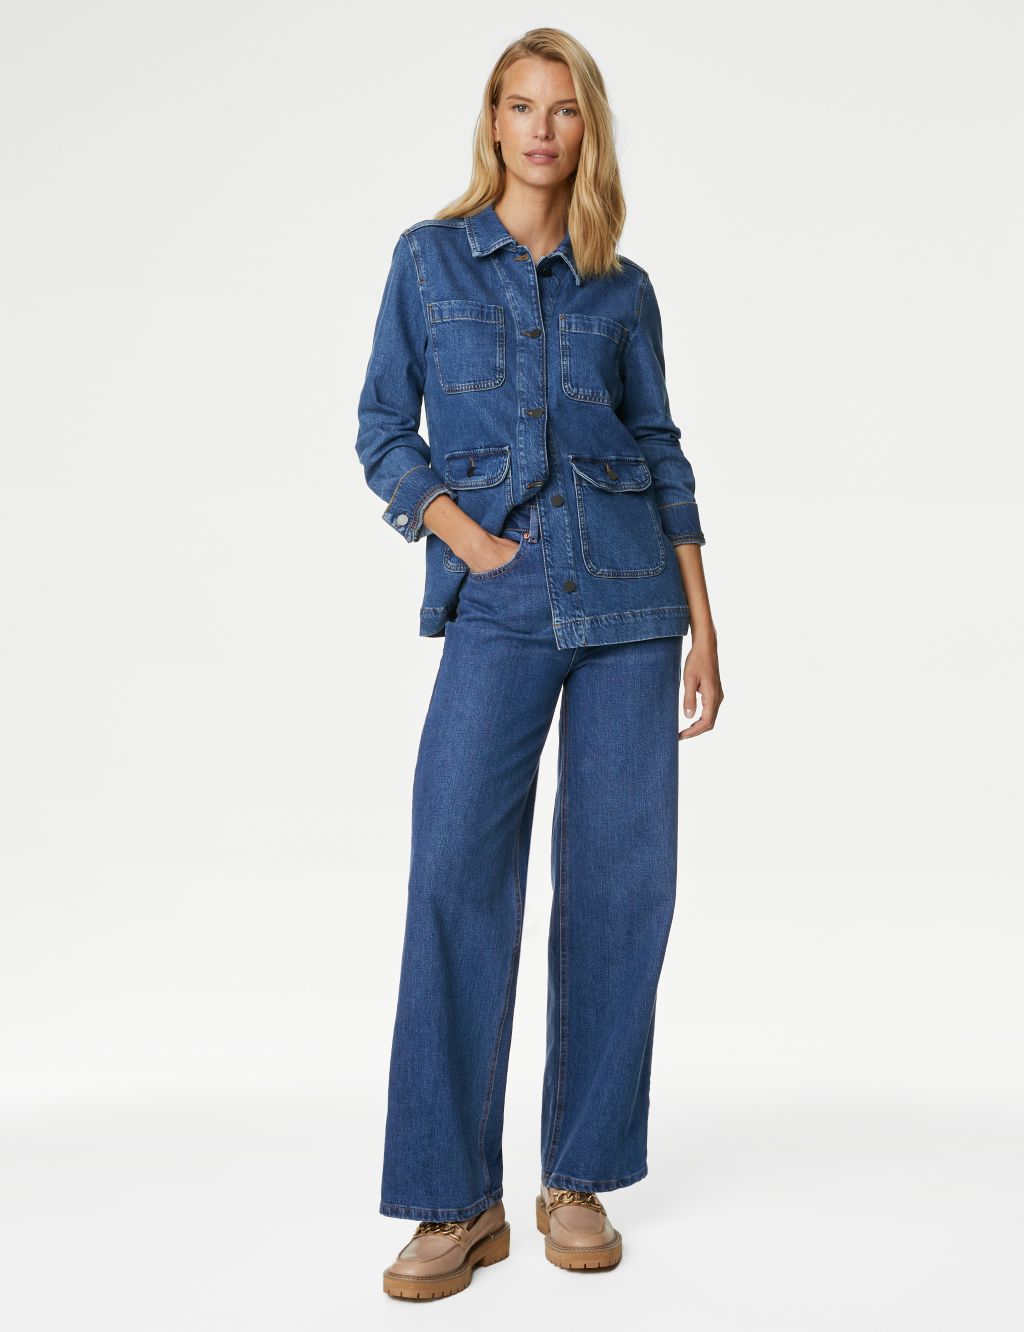 The Wide-Leg Jeans image 3